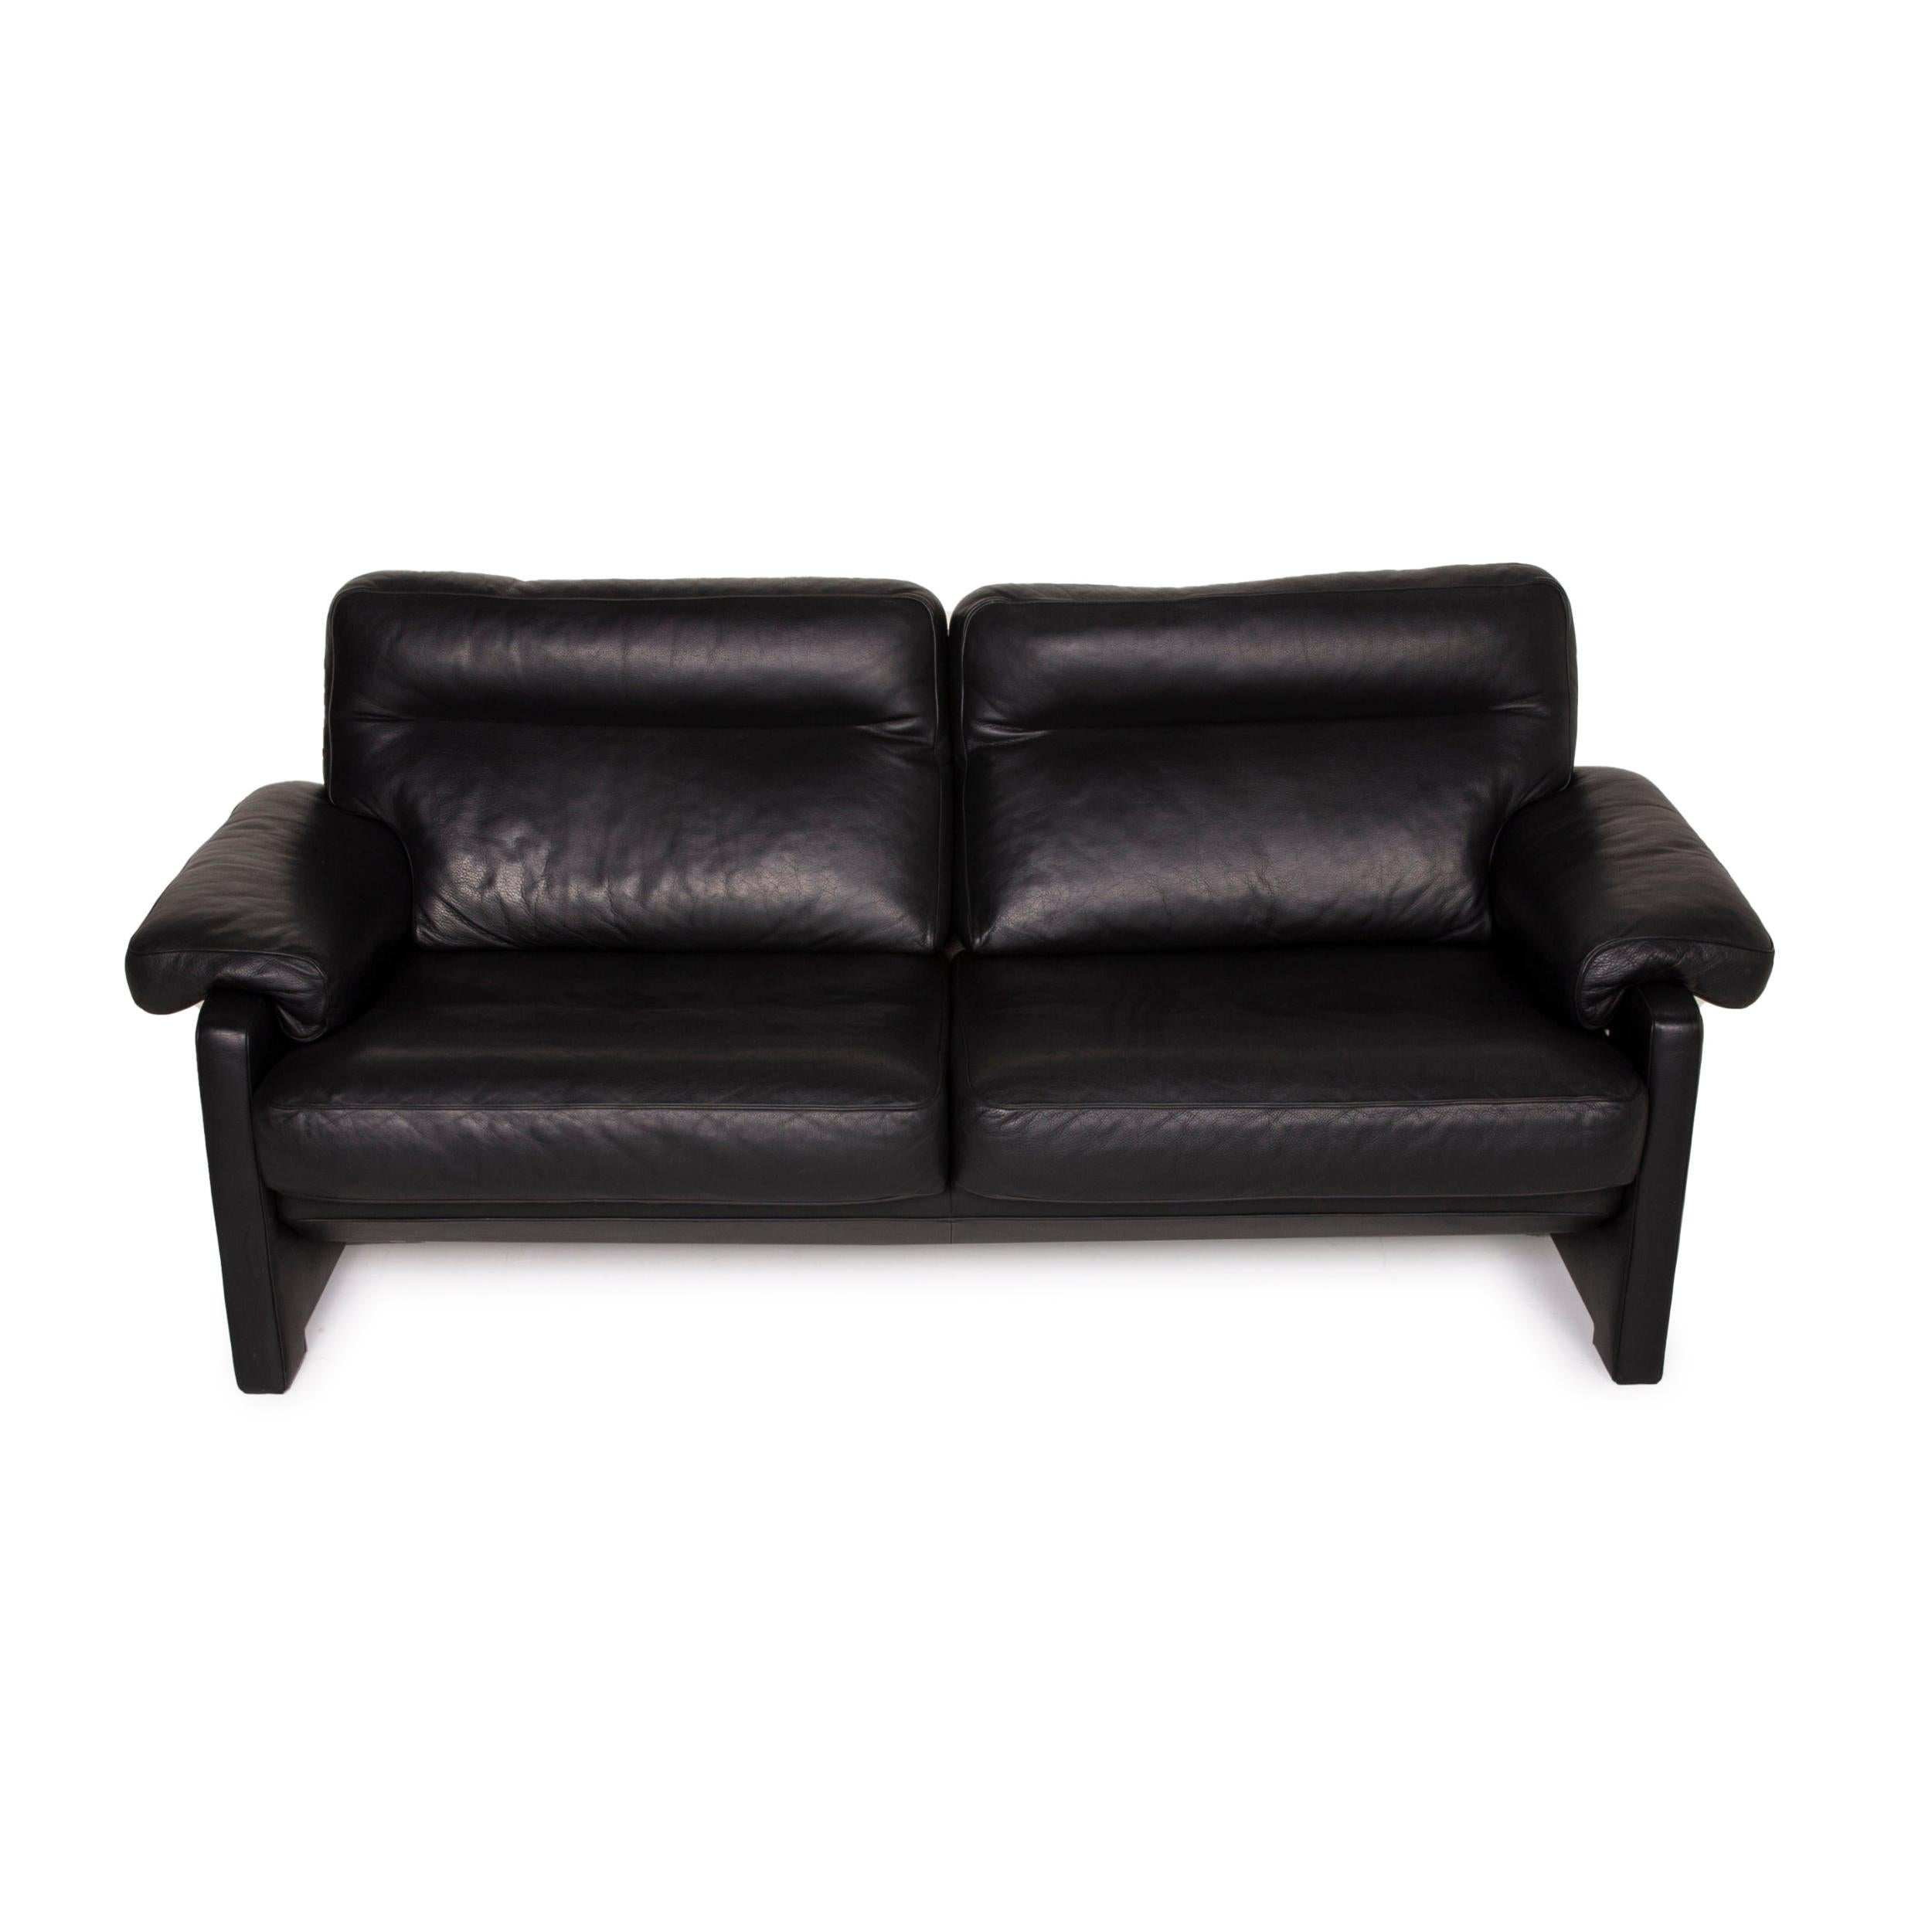 De Sede Ds 70 Leather Sofa Set Black 1x Three-Seater 1x Two-Seater Set For Sale 2